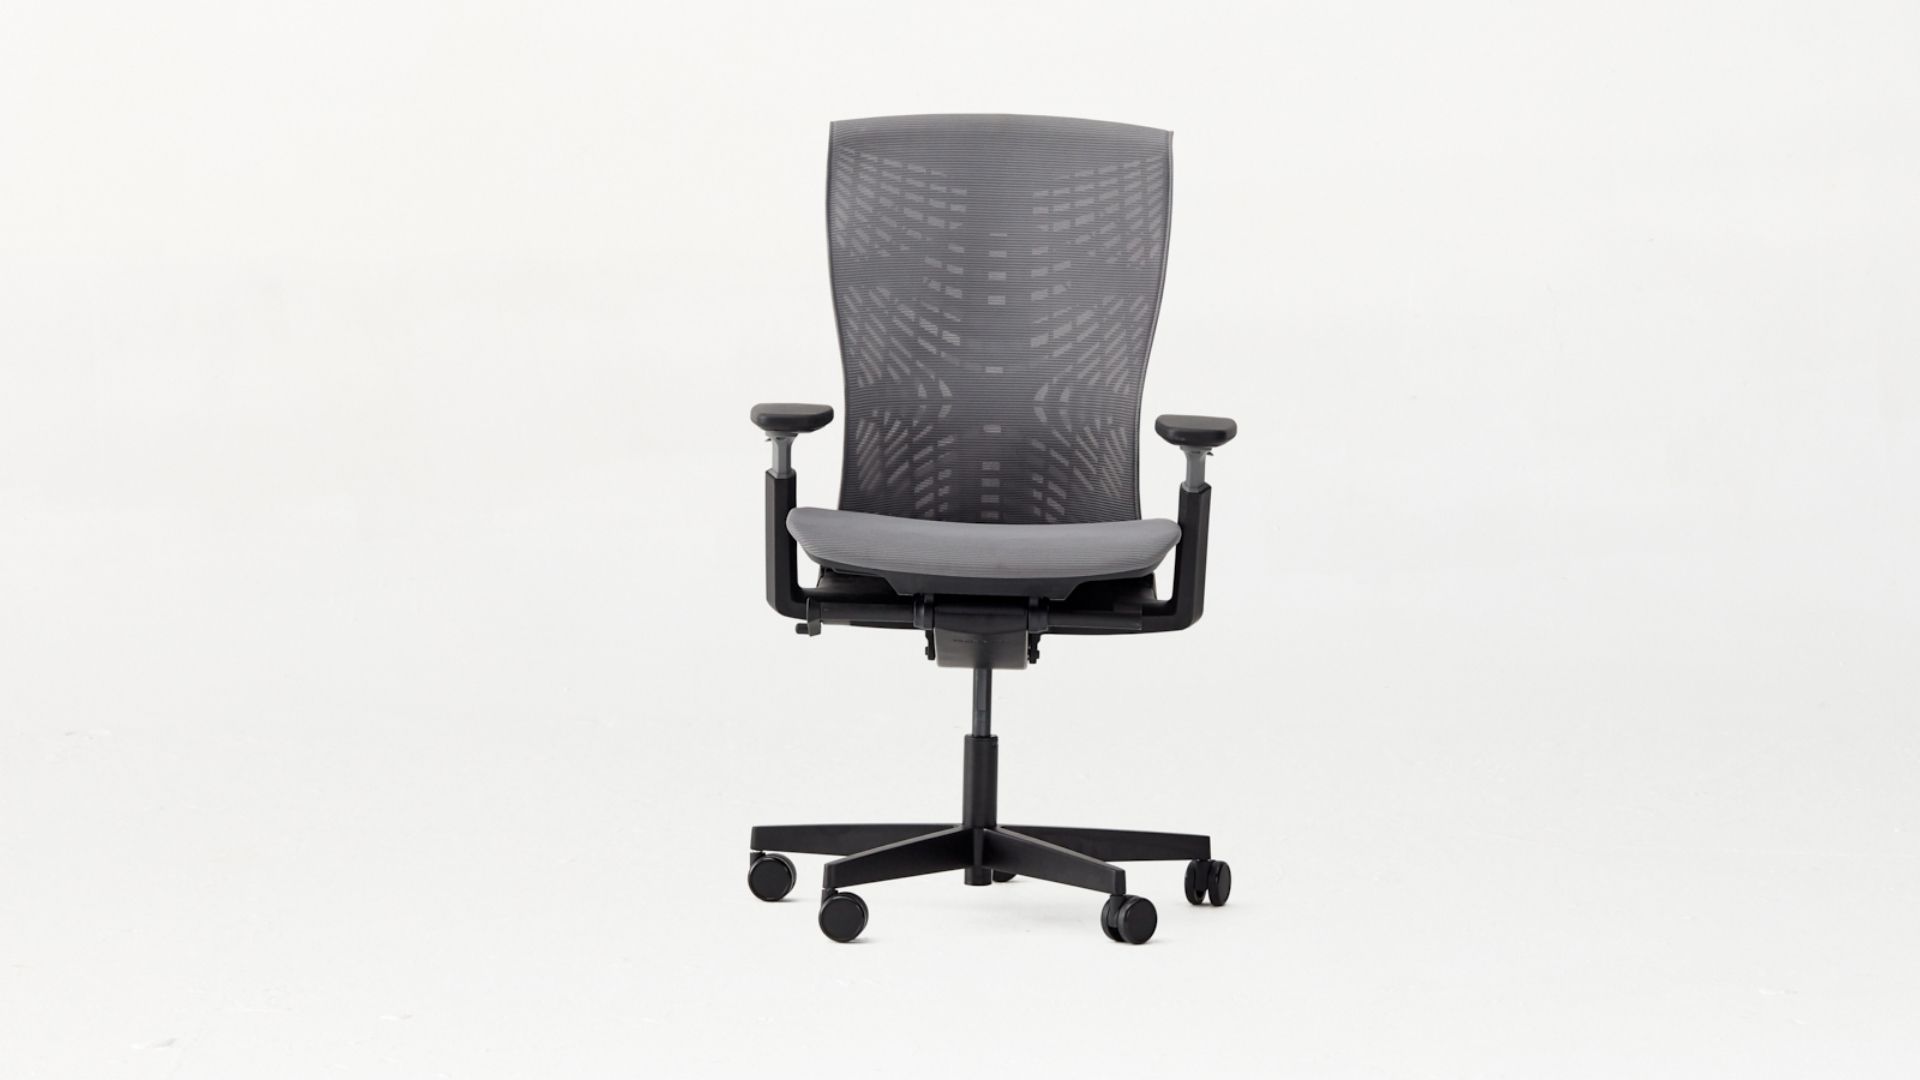 ErgoChair Pro+ ergonomic chair with gray upholstery and a mesh back for the office